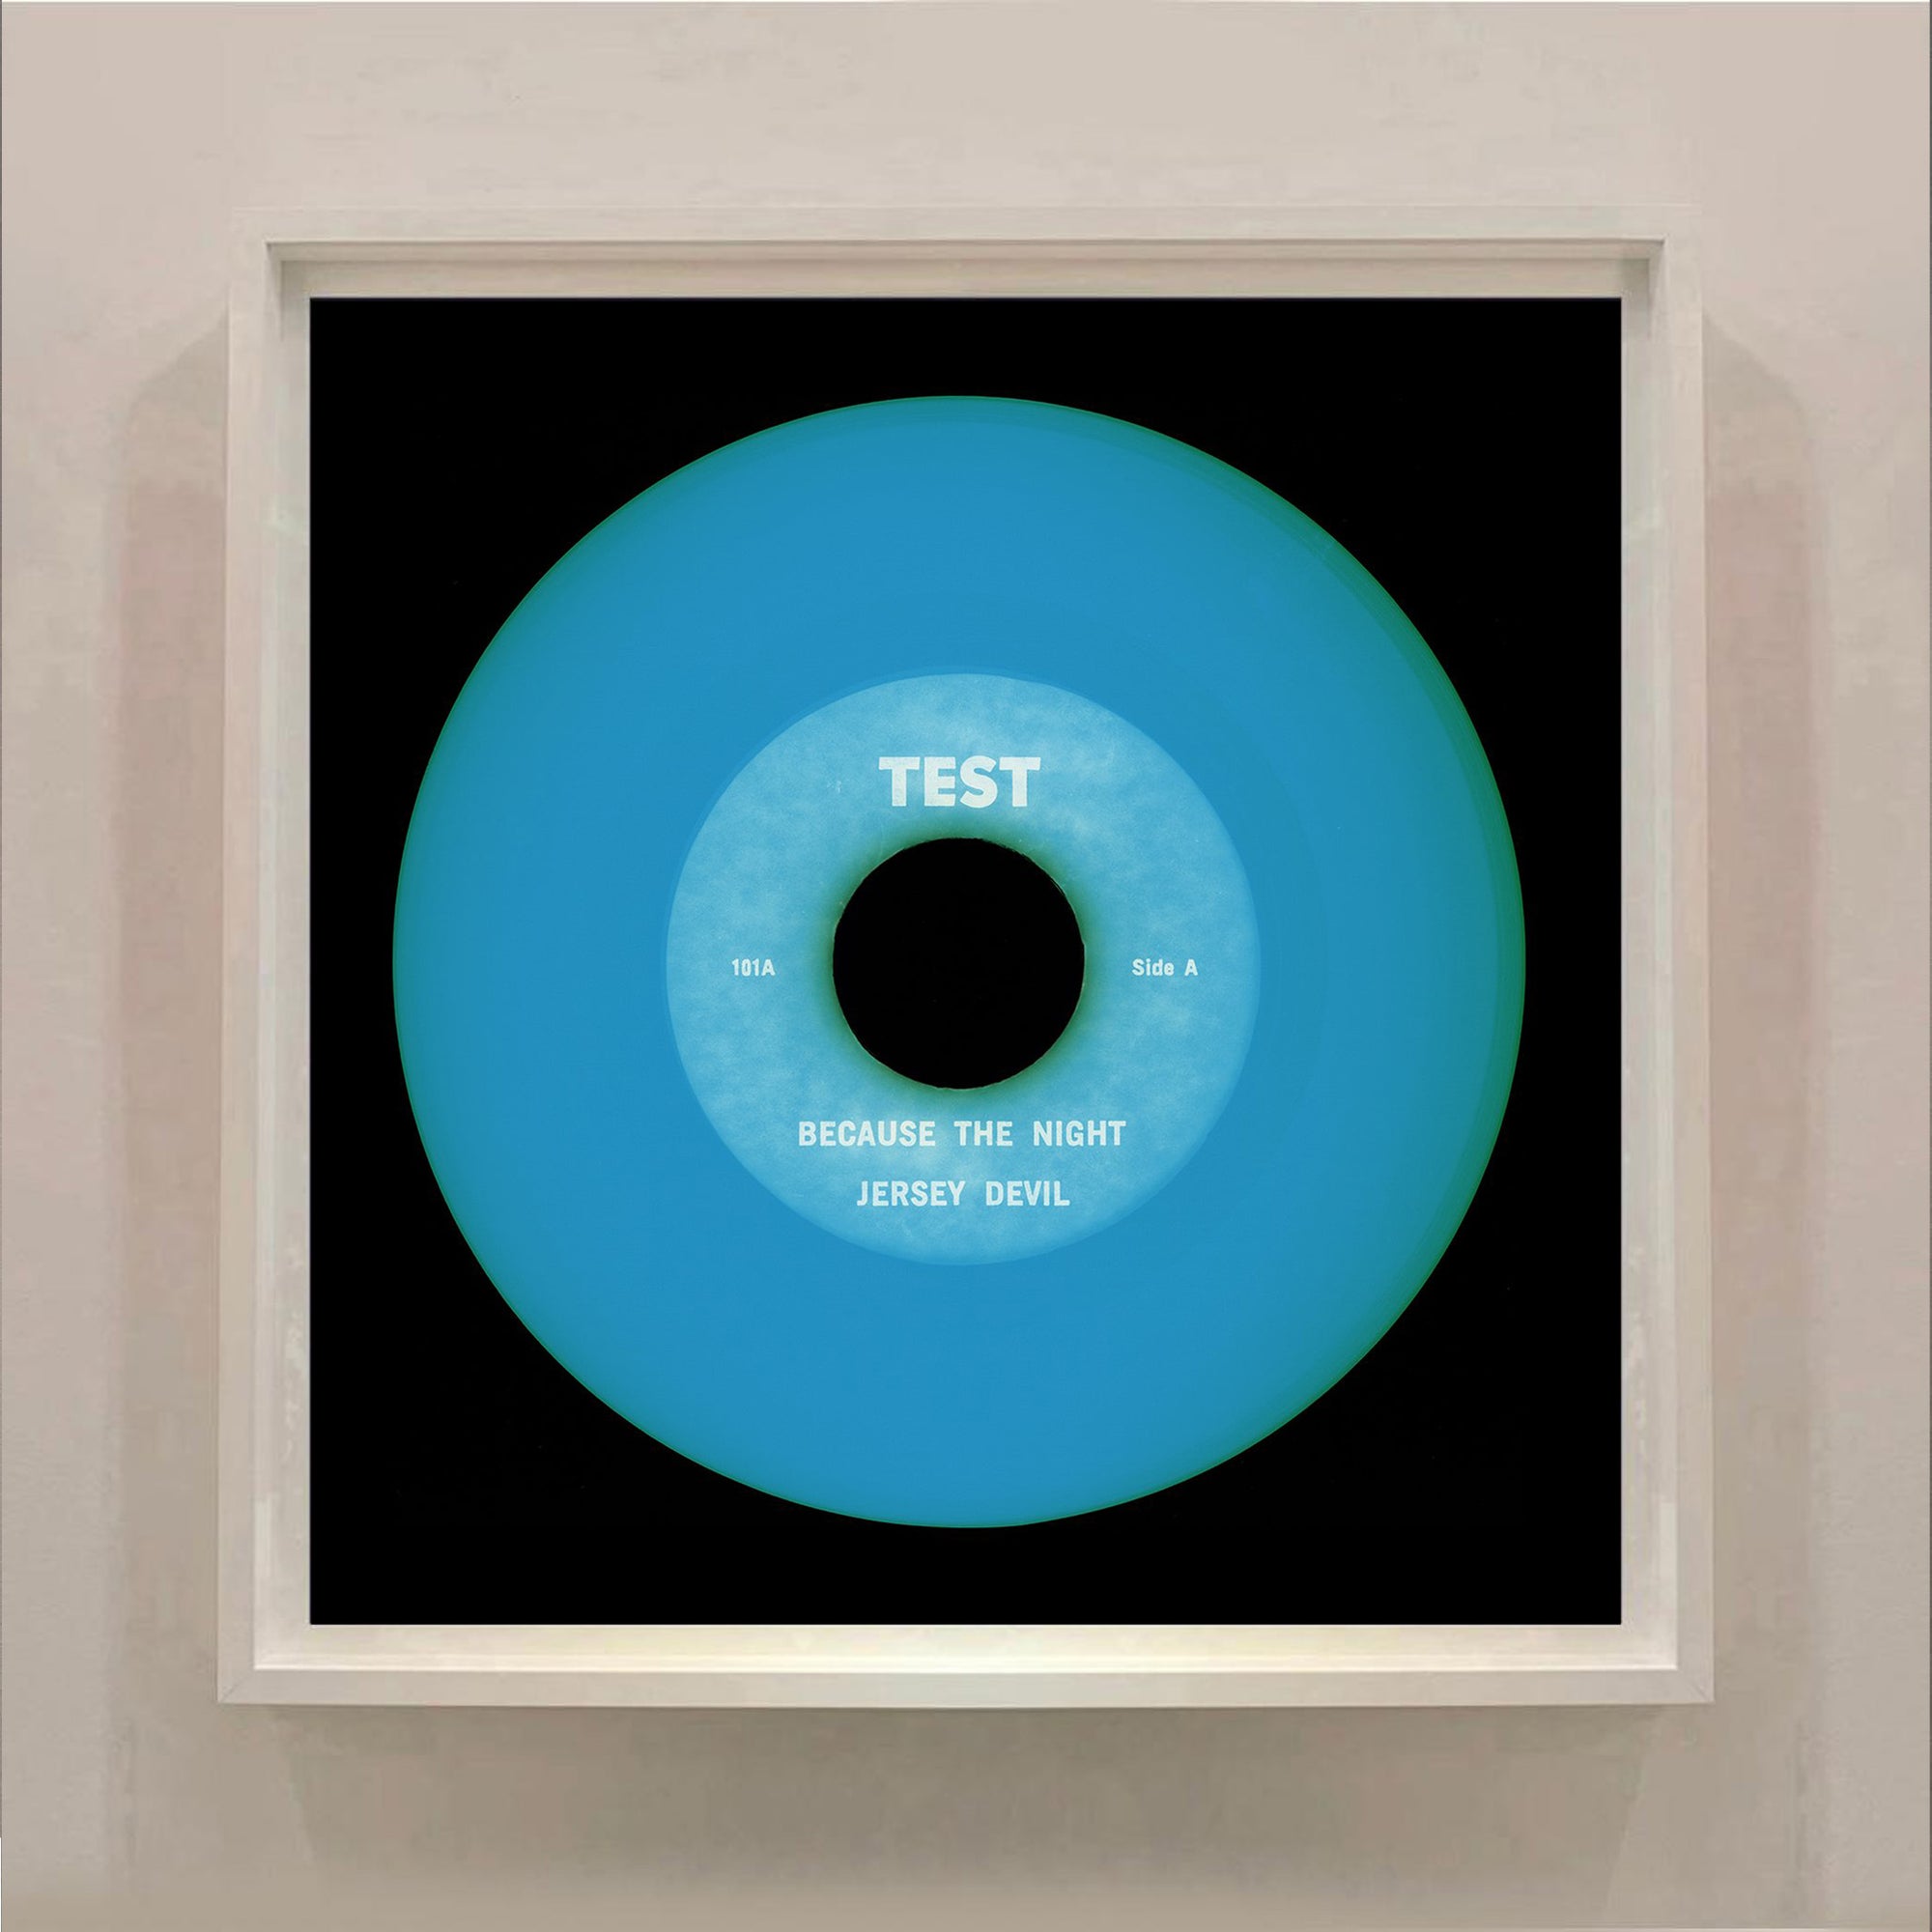 Vinyl Collection 'TEST'. Acclaimed contemporary photographers, Richard Heeps and Natasha Heidler have collaborated to make this beautifully mesmerising collection. A celebration of the vinyl record and analogue technology, which reflects the artists practice within photography. 